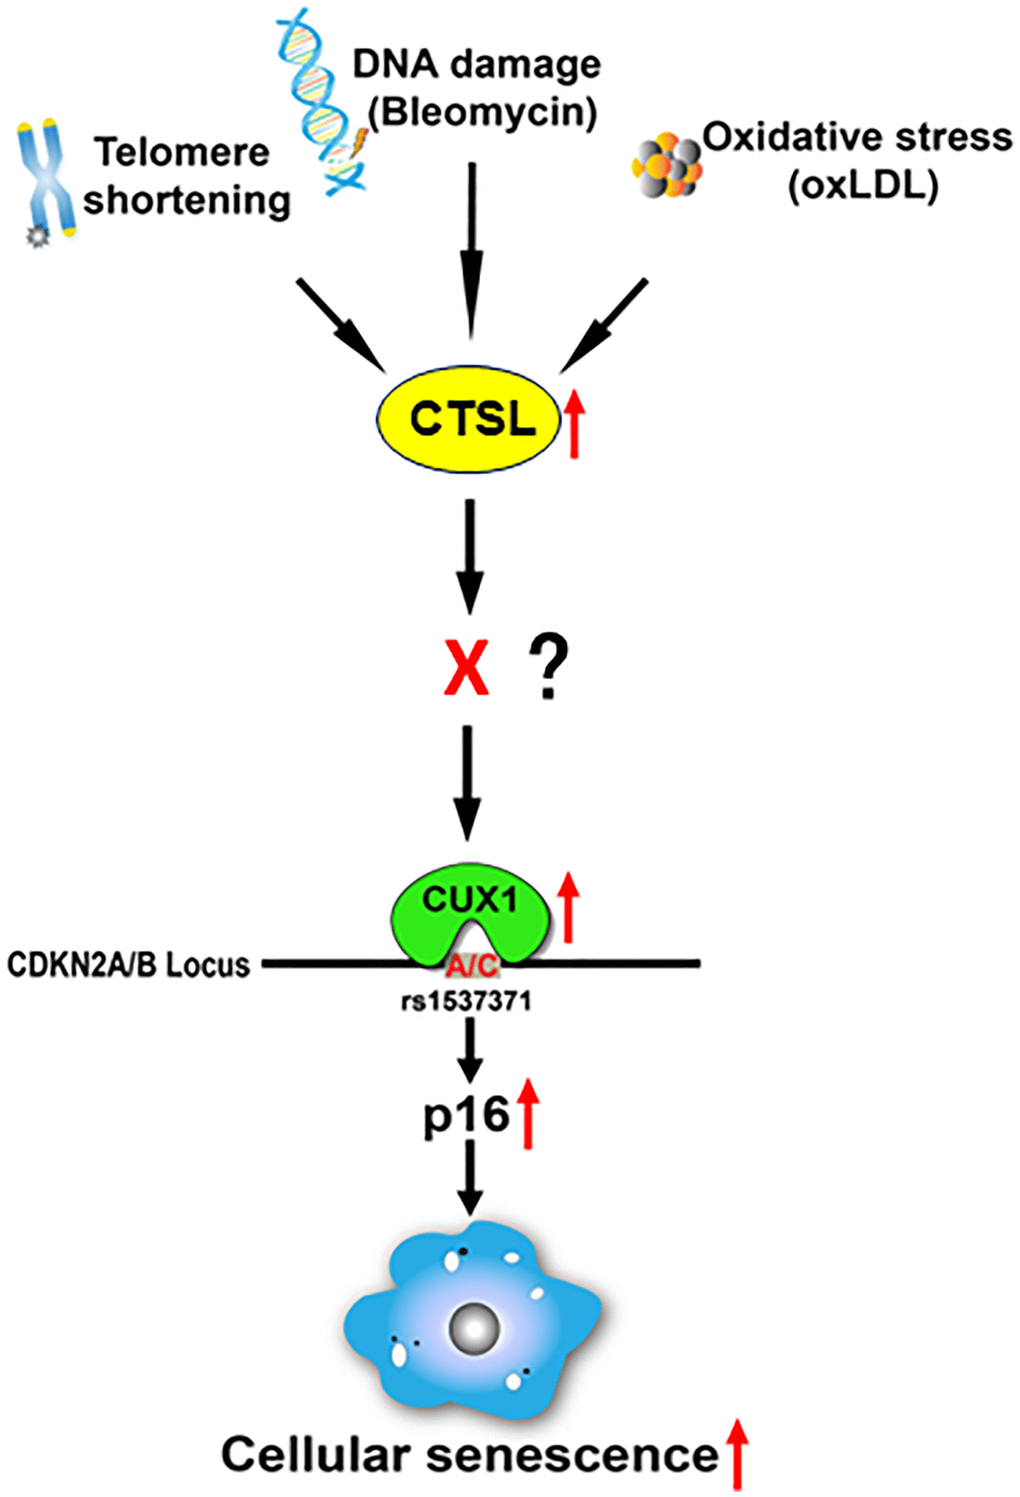 Proposed diagram showing a signaling pathway that leads to the activation of p16-dependent cellular senescence in response to telomeric shortening, DNA damage, and oxidative stress. Based on our findings, we believe that telomeric shortening, DNA damage, and oxidative stress can transcriptionally activate CTSL, which results in the transcriptional activation of CUX1. As a result, p16INK4a is activated by CUX1 via its binding to the atherosclerosis-associated fSNP rs1537371, inducing cellular senescence. As CTSL is not a transcription factor and CTSL protease activity is required for the activation of CUX1 as well as cellular senescence, we believe that in between CTSL and CUX1, there is a currently unknown transcription factor X that can be proteolytically activated by CTSL and transcribe CUX1.